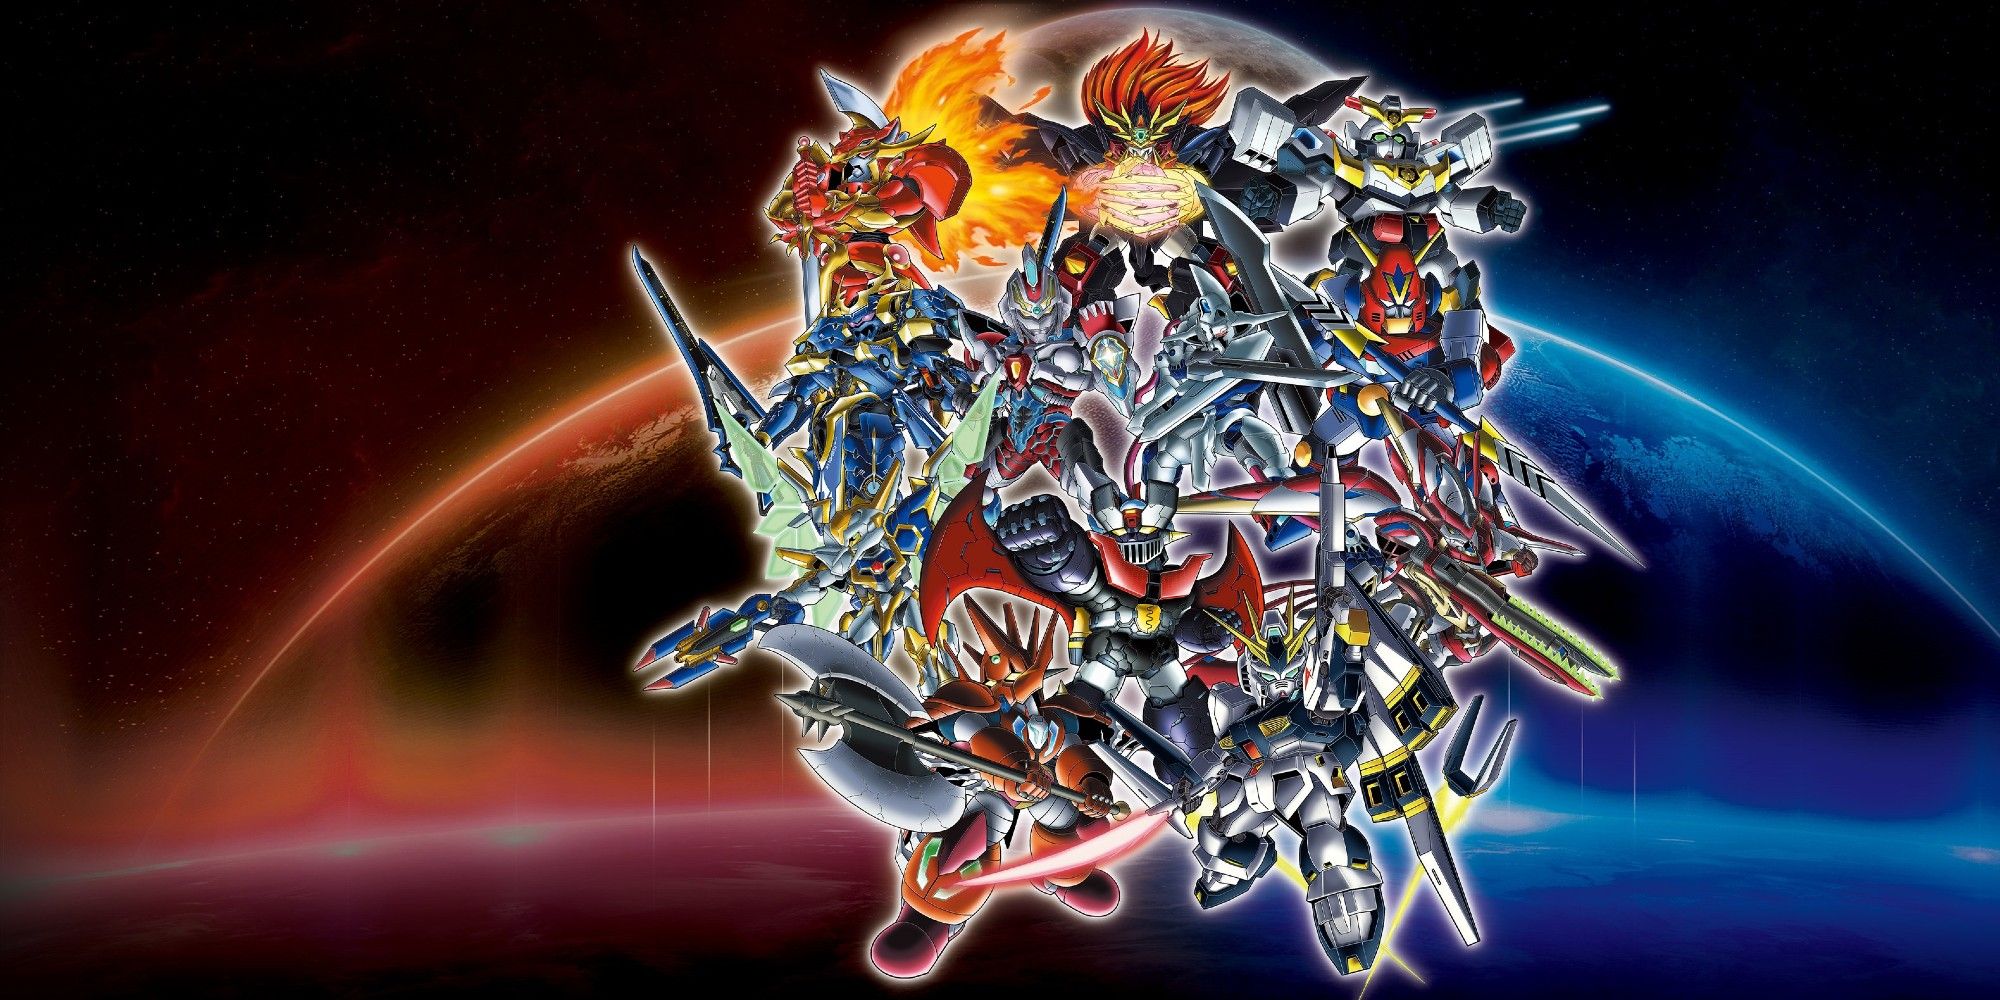 Super Robot Wars 30 How to Build The Best Team Related Hardcore Mecha Review Glorious Mech Fighting Action